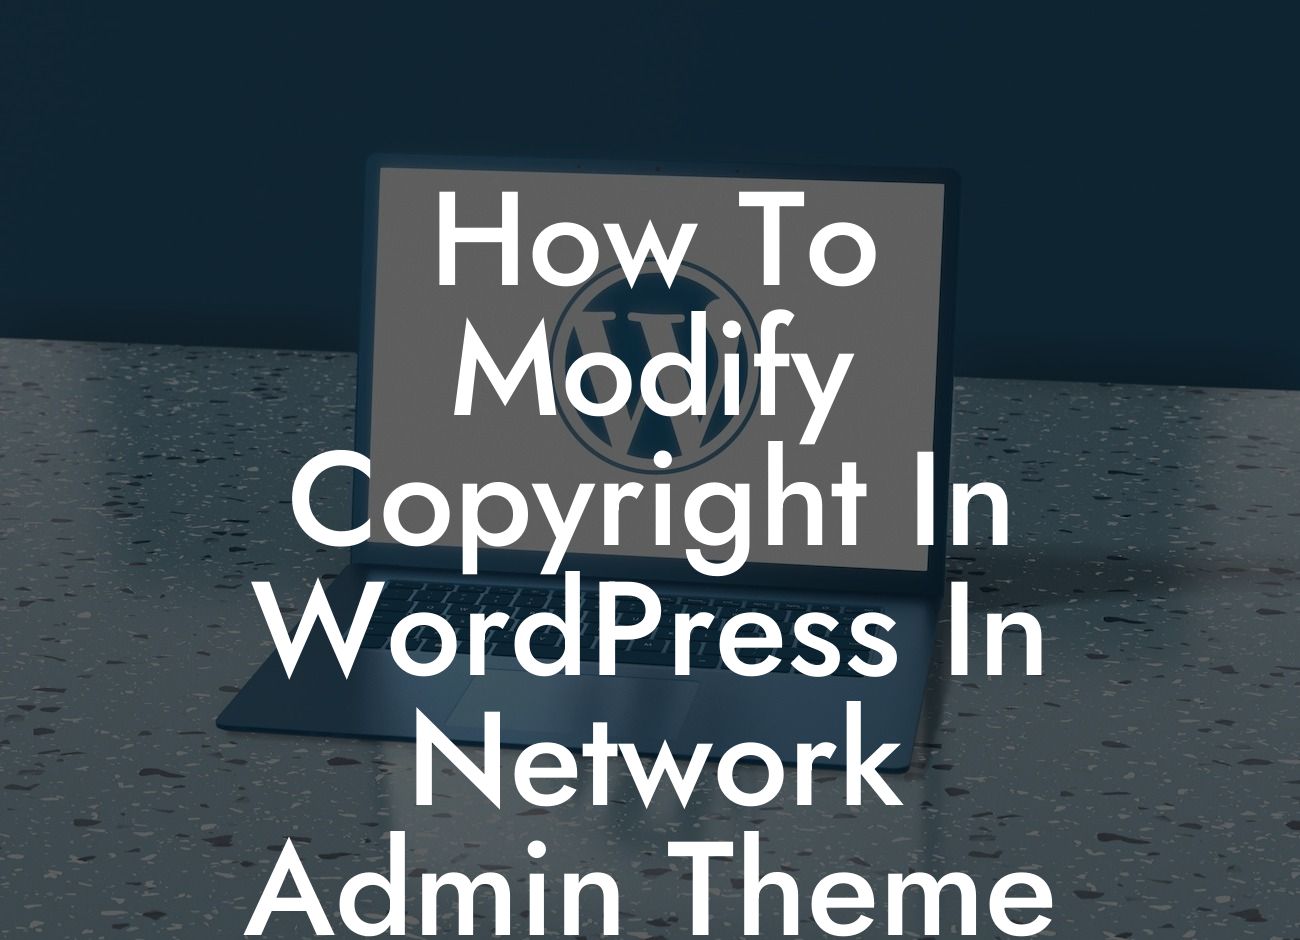 How To Modify Copyright In WordPress In Network Admin Theme